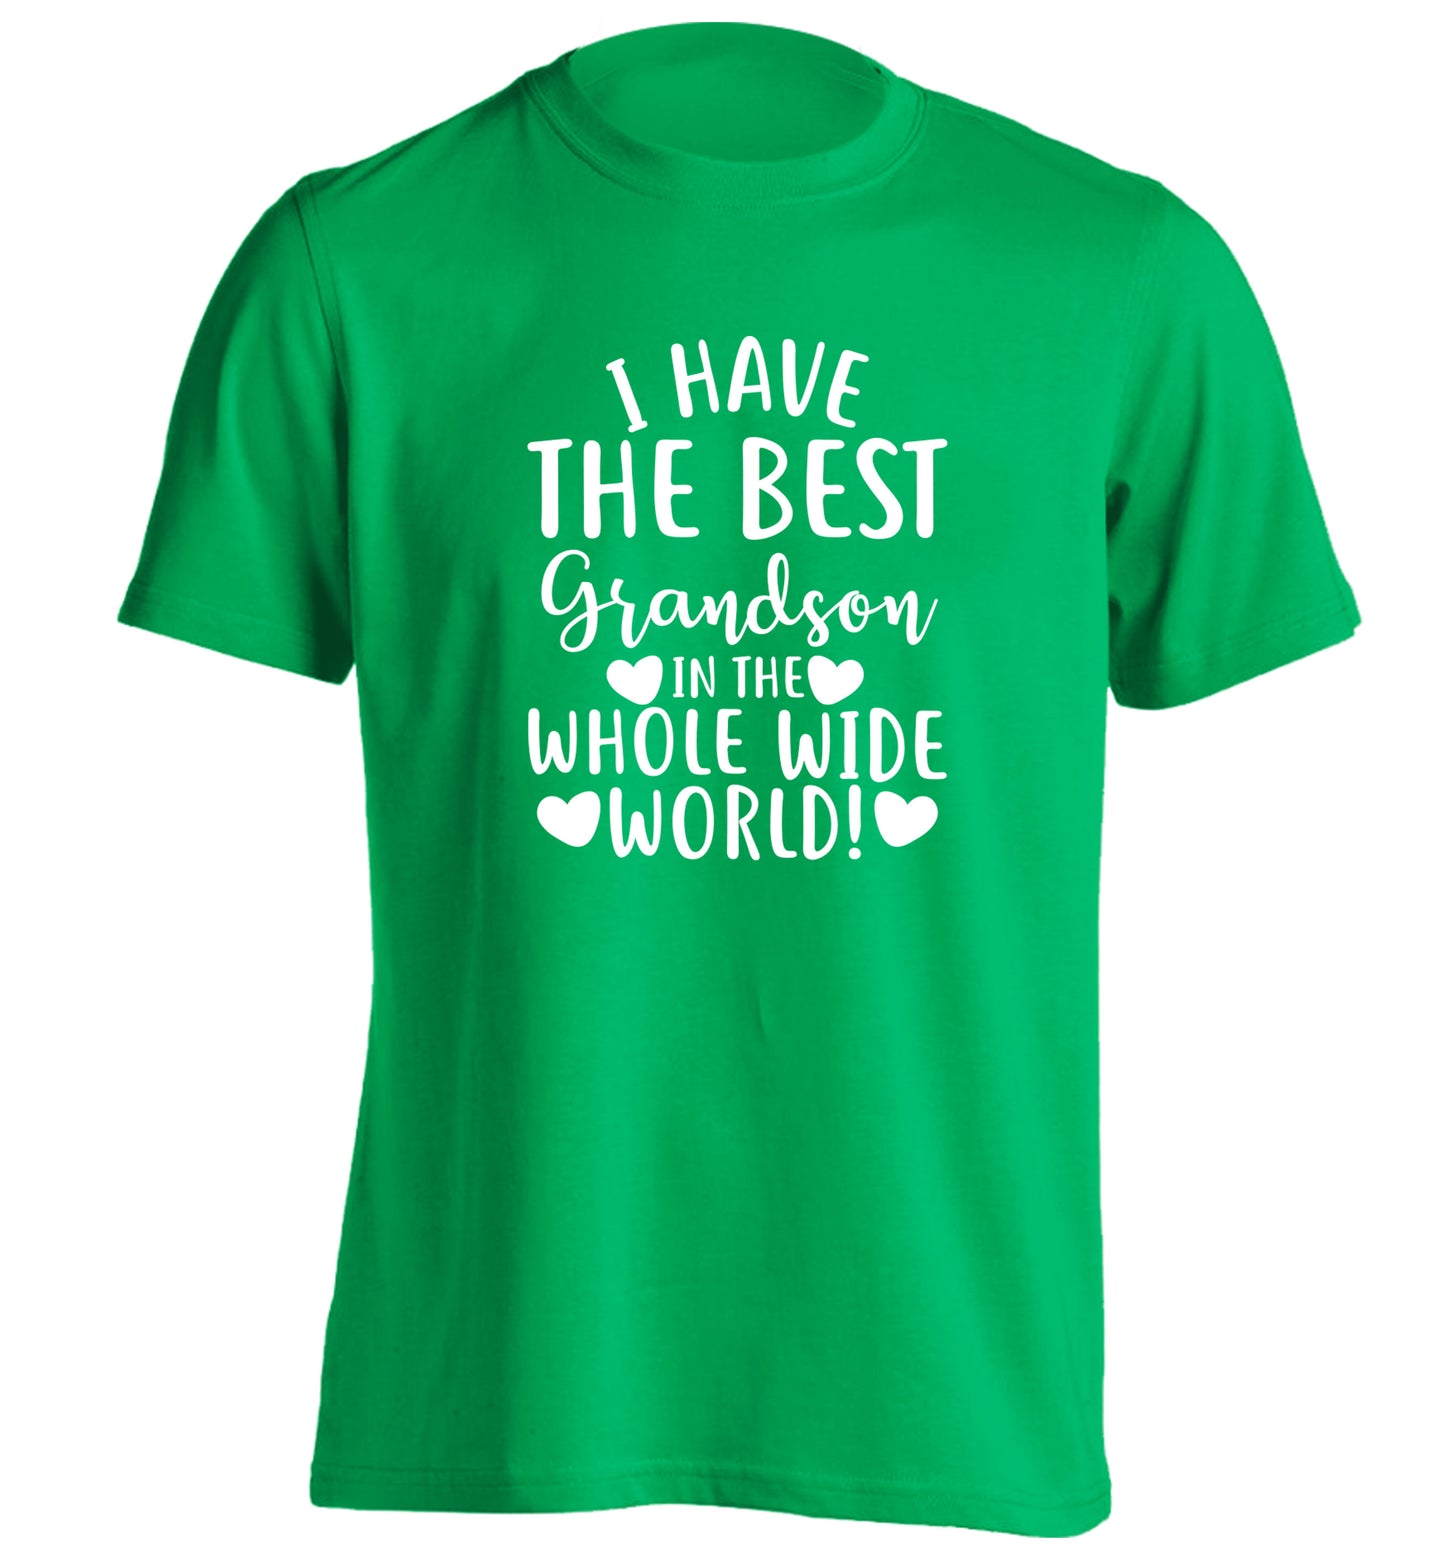 I have the best grandson in the whole wide world! adults unisex green Tshirt 2XL